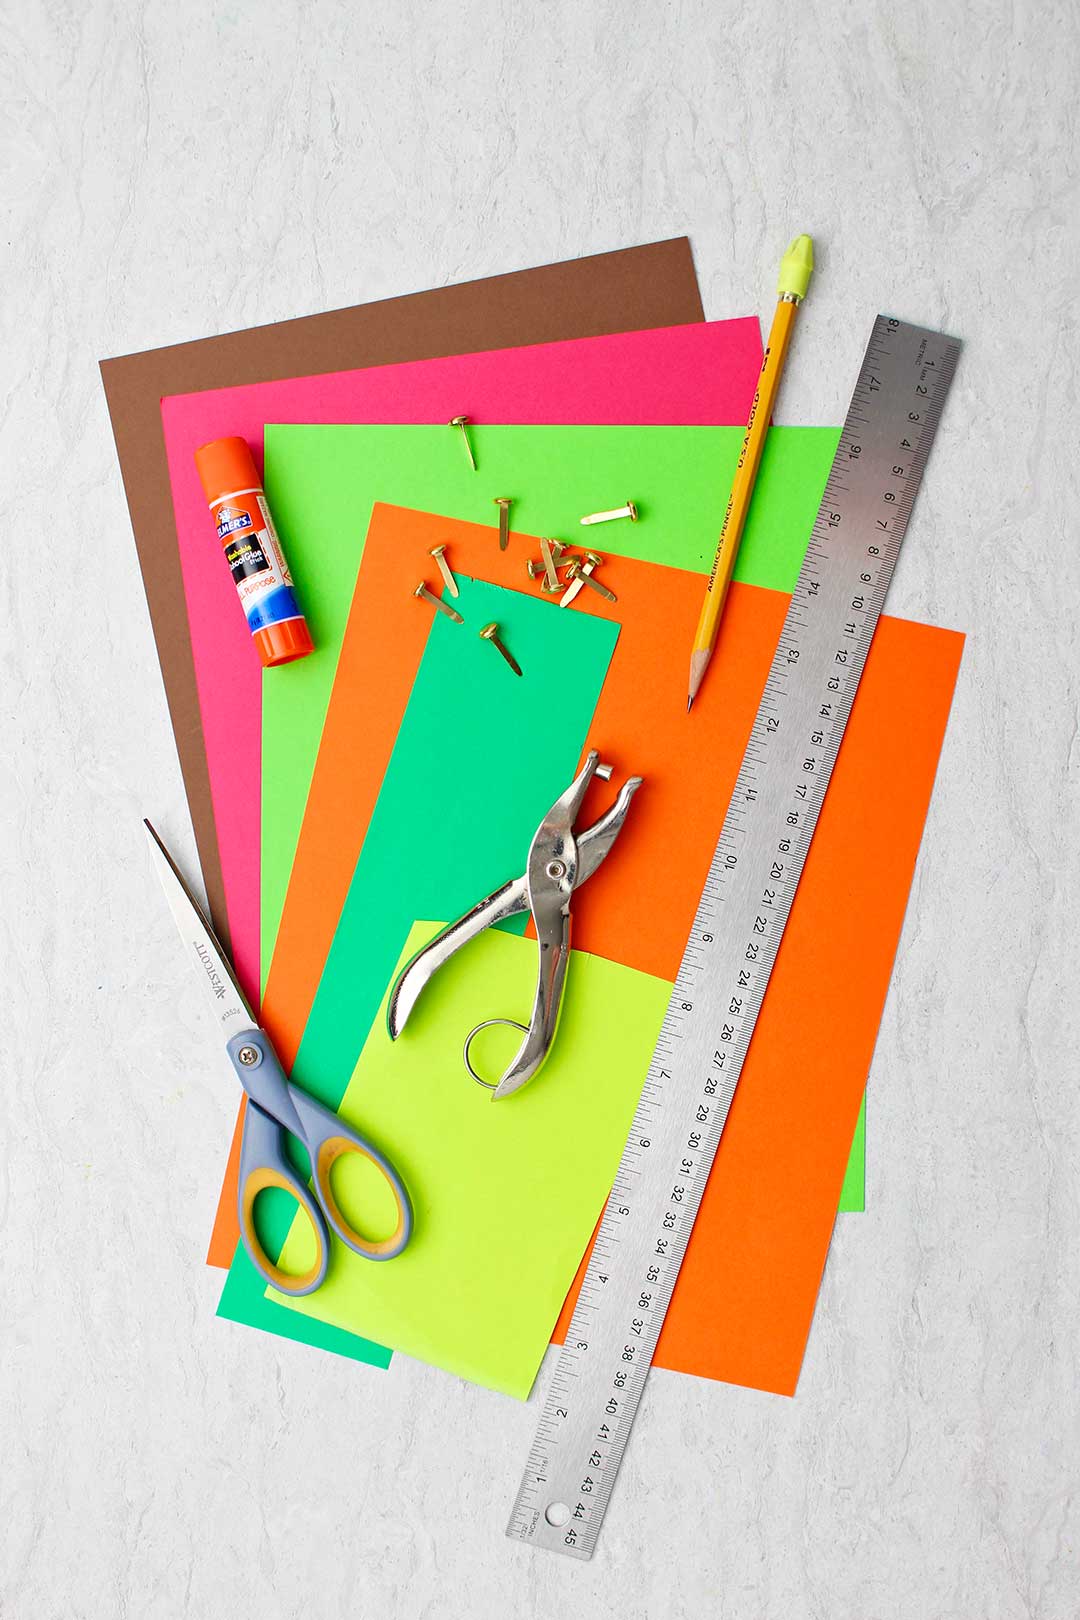 Different colored papers, metal ruler, pencil, scissors, hole punch, metal brads and glue stick.